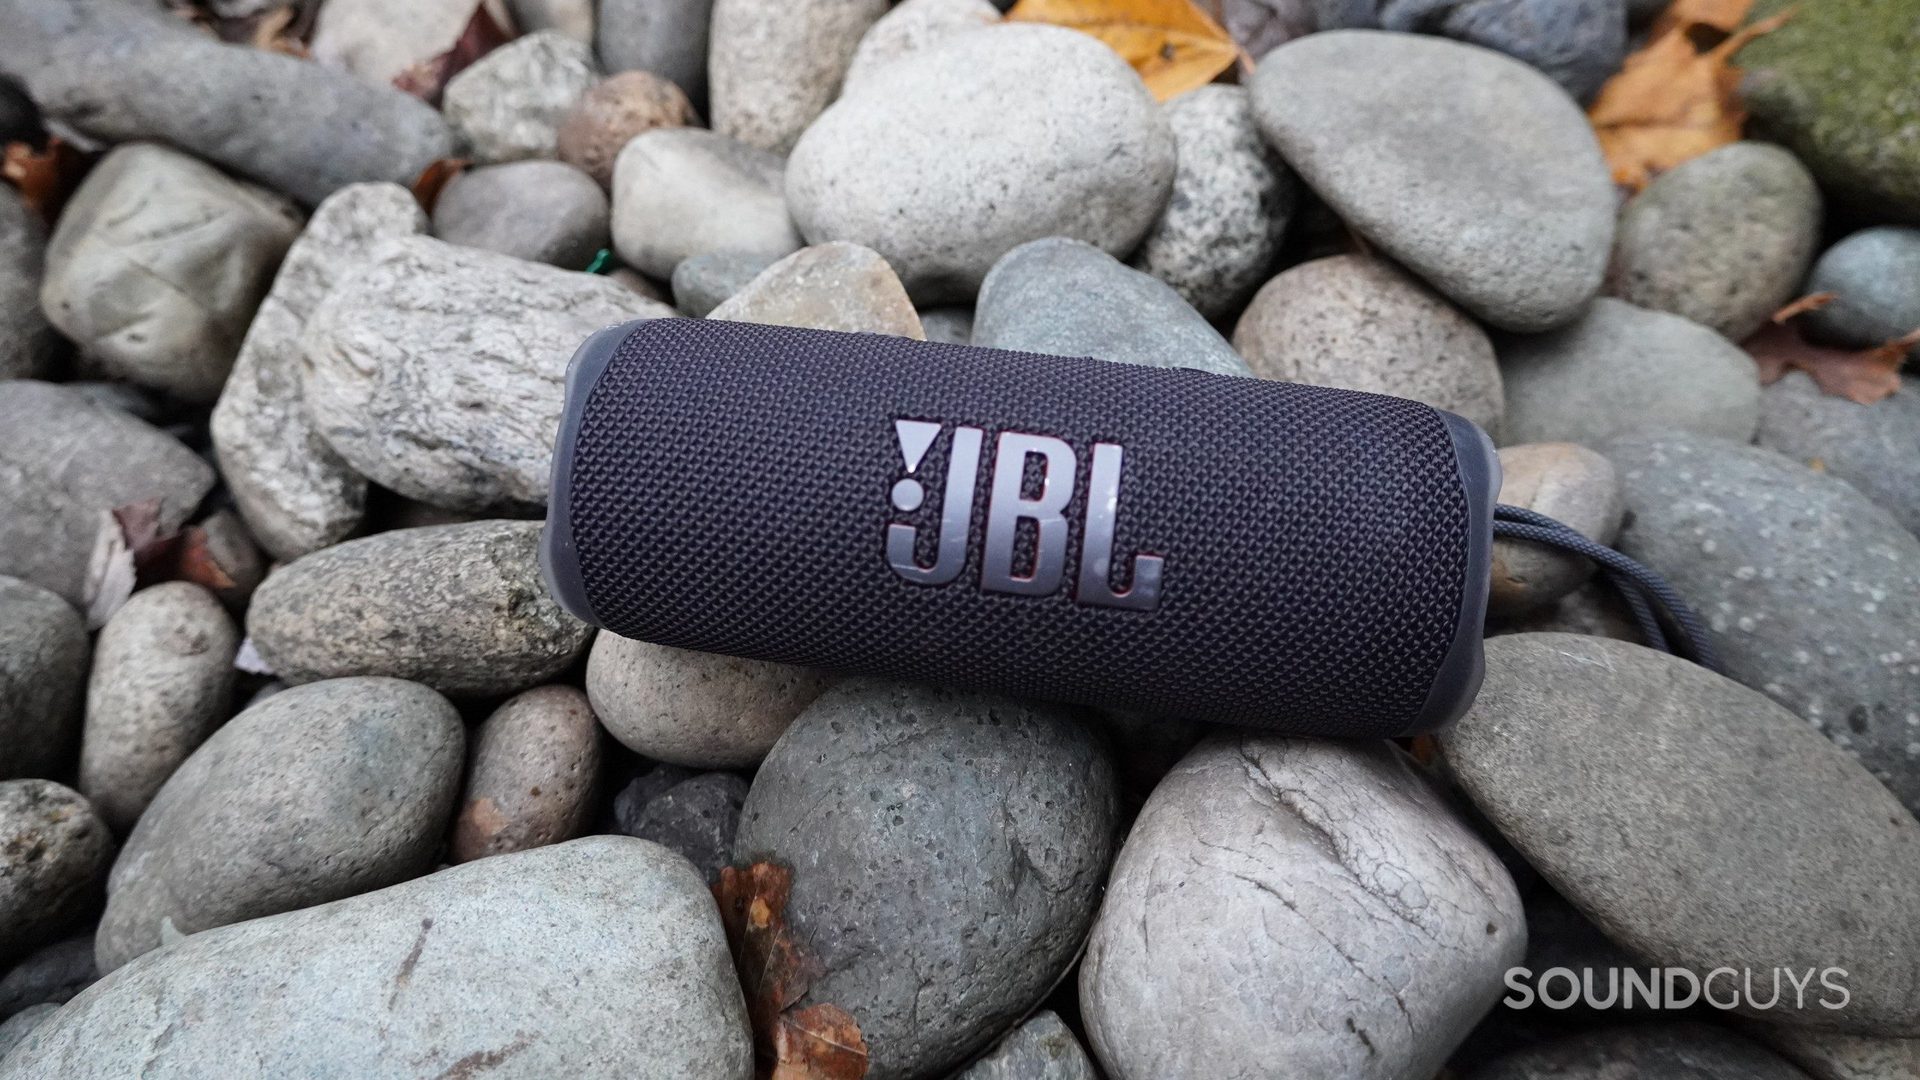 The JBL Flip 6 sittng on stones outdoors.